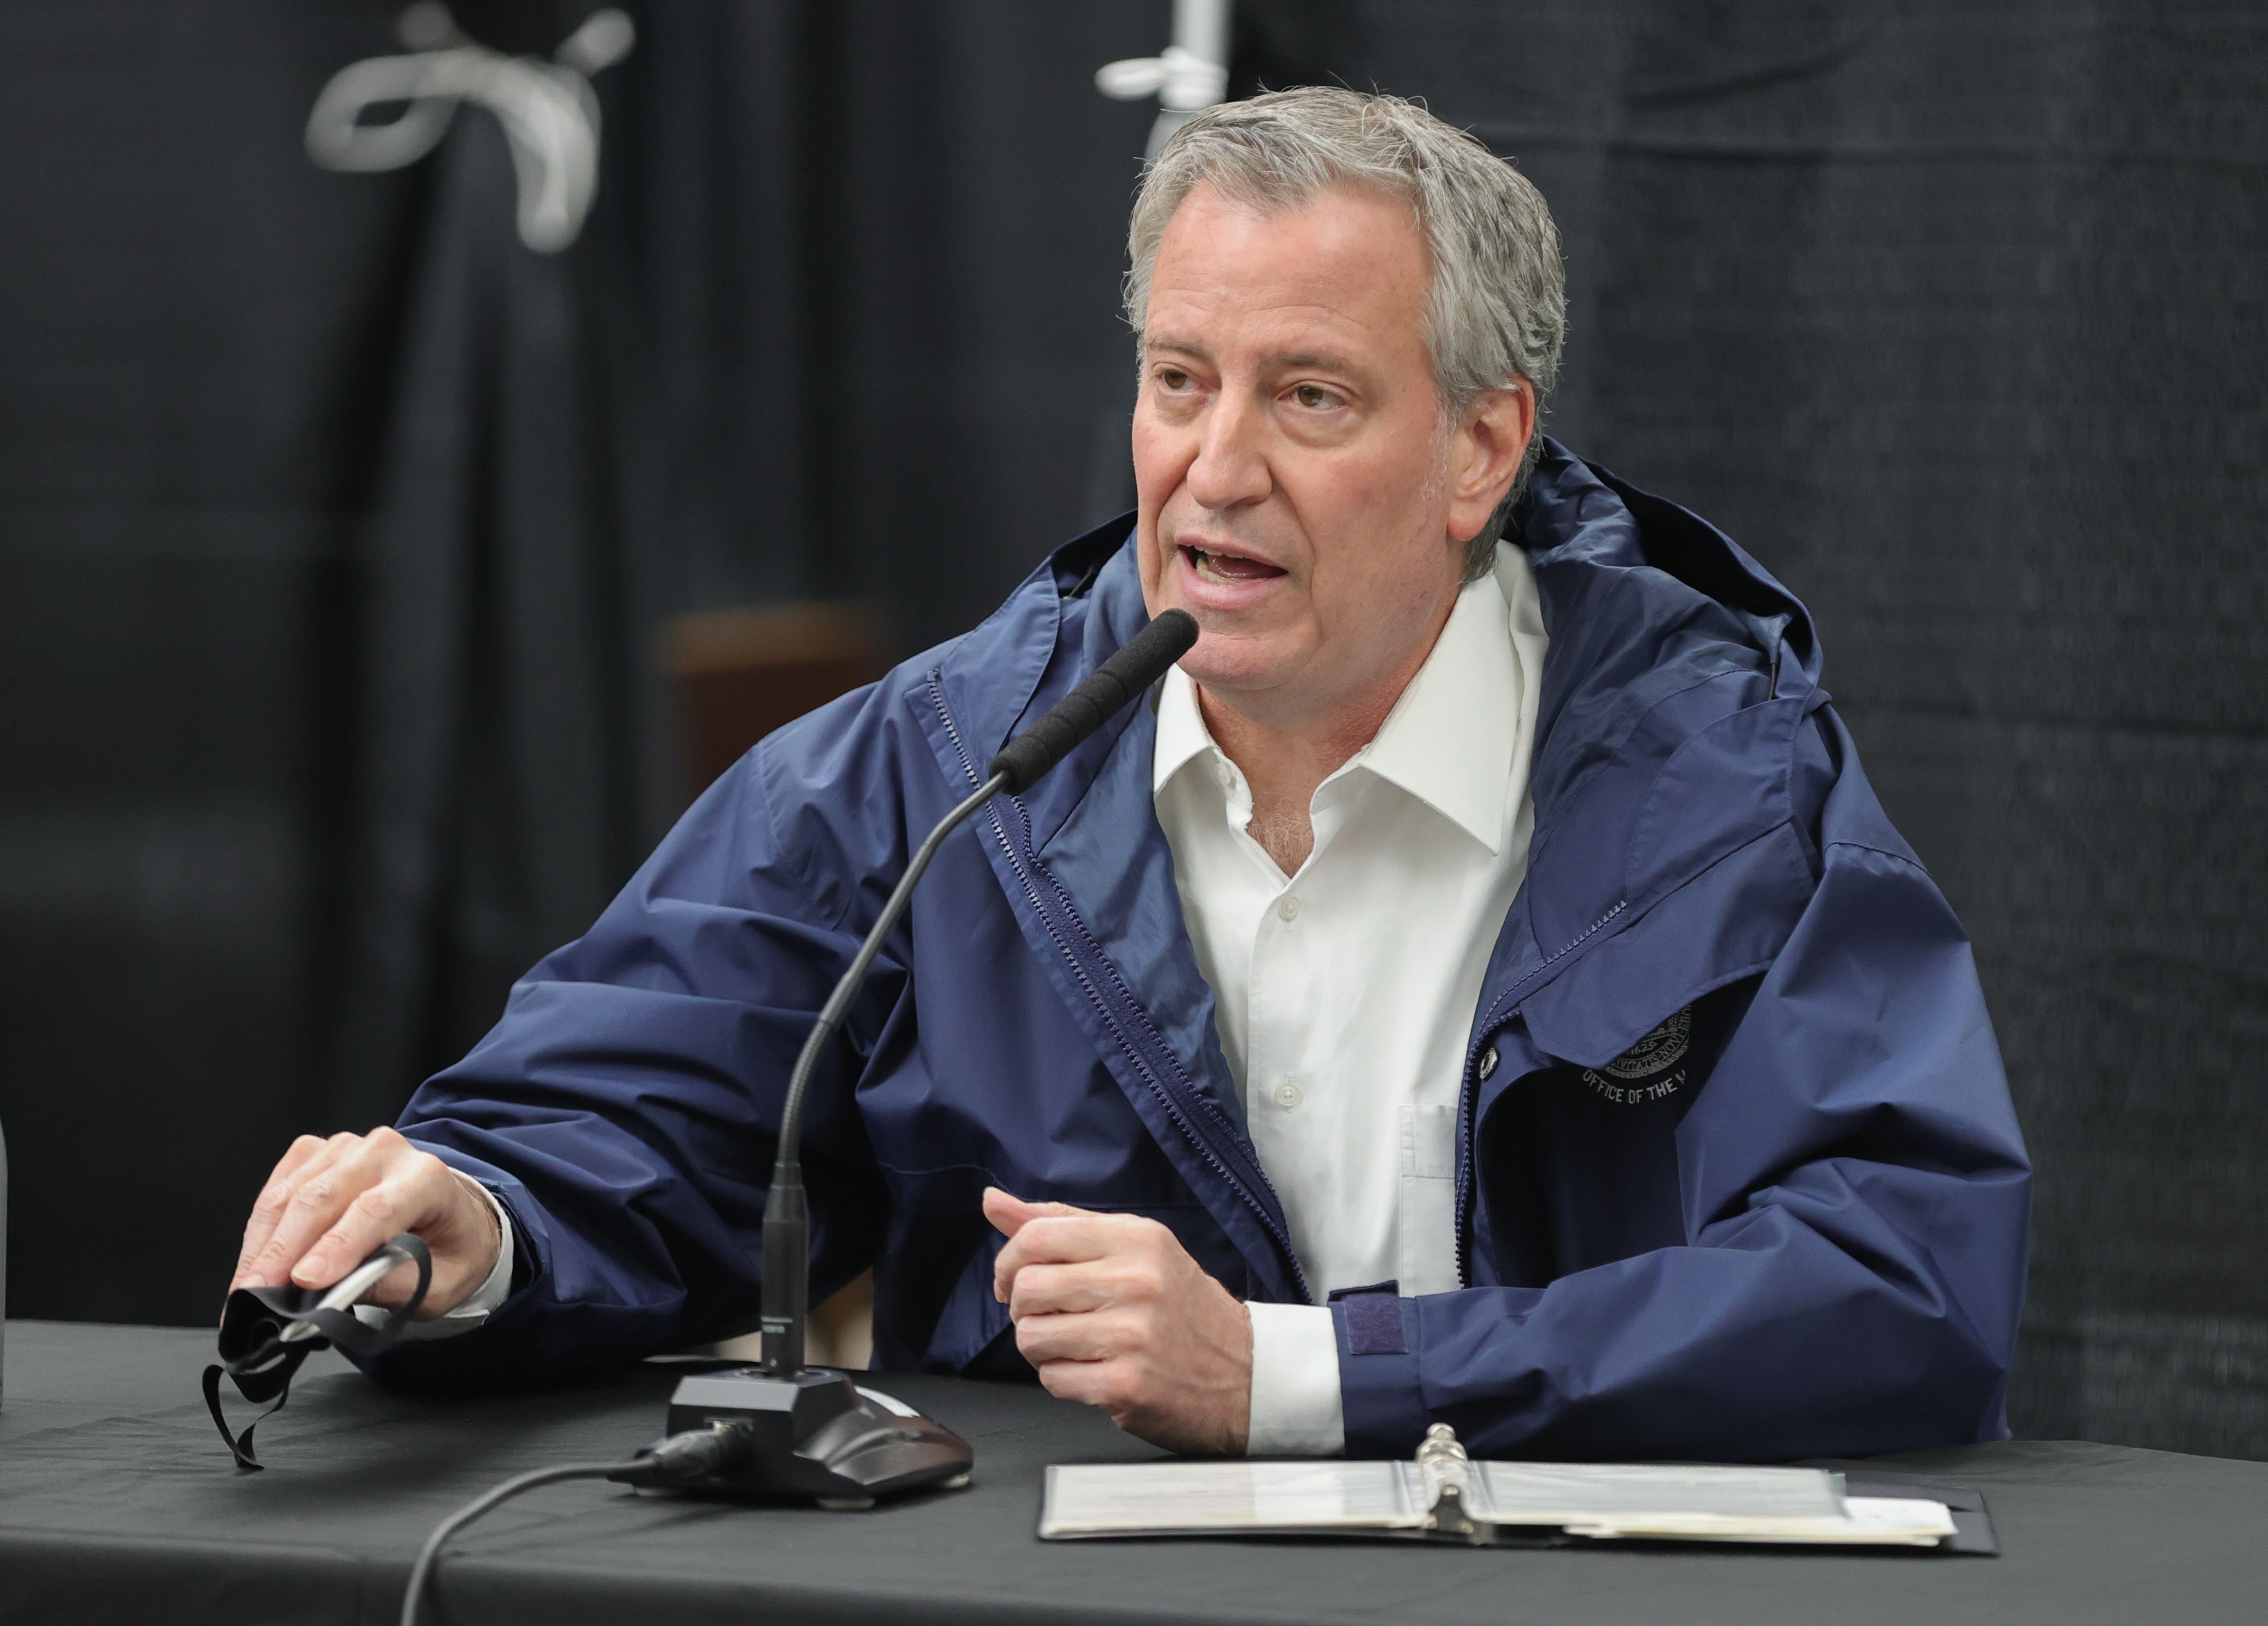 NYC to hire 1,000 health workers in May to trace cases, Mayor de Blasio says